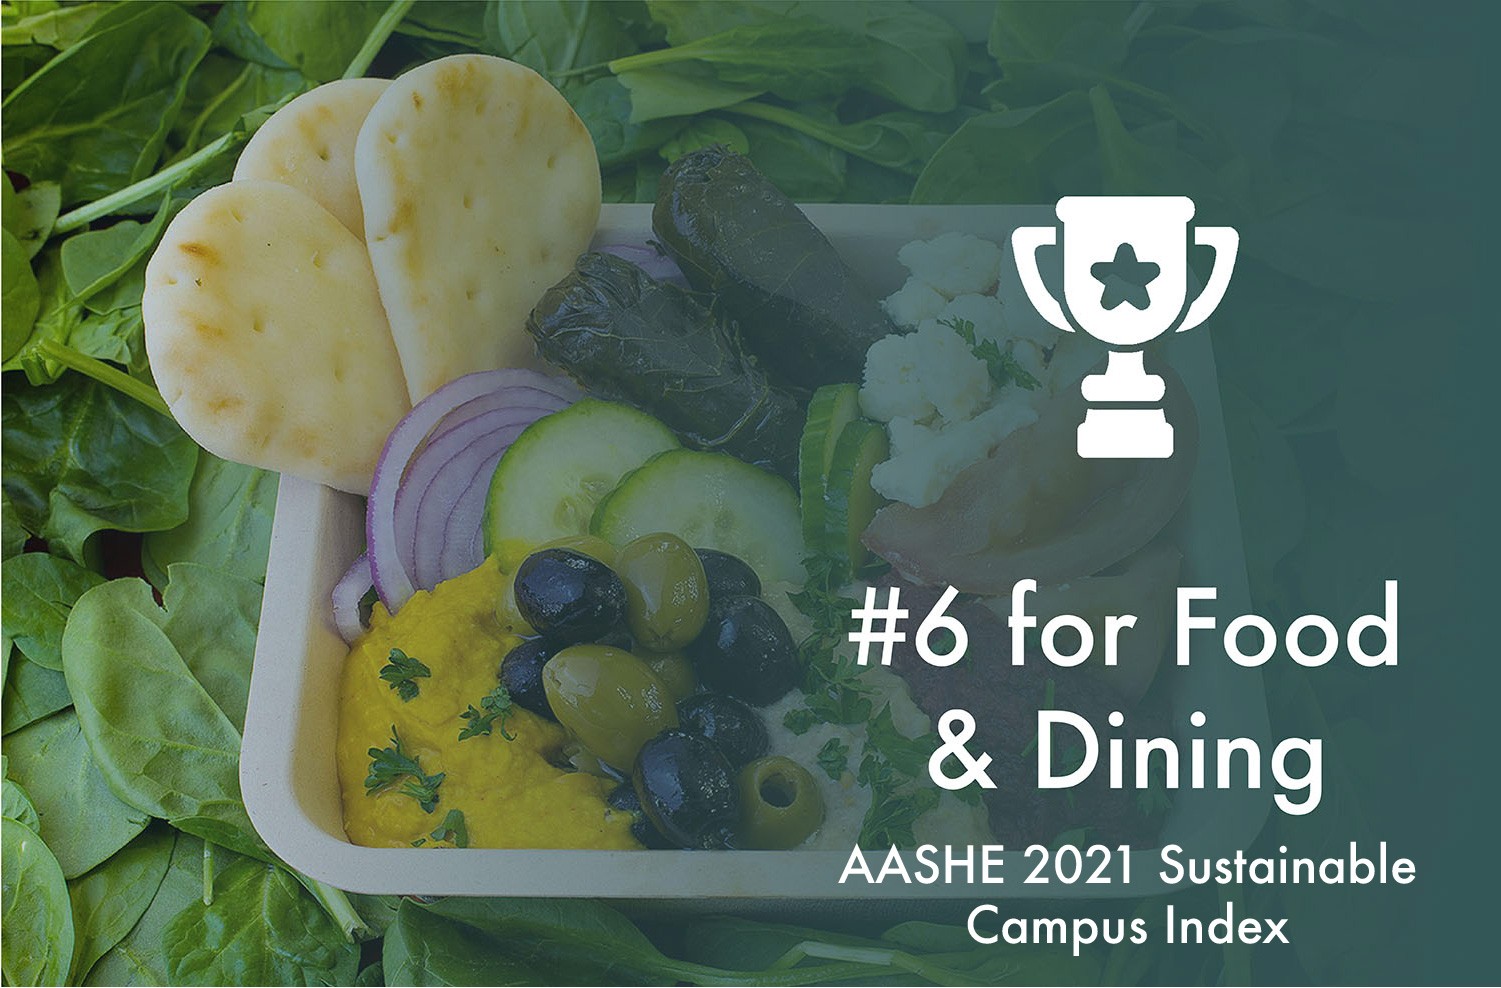 An icon of a trophy above text: #6 for Food & Dining / AASHE 2021 Sustainability Campus Index